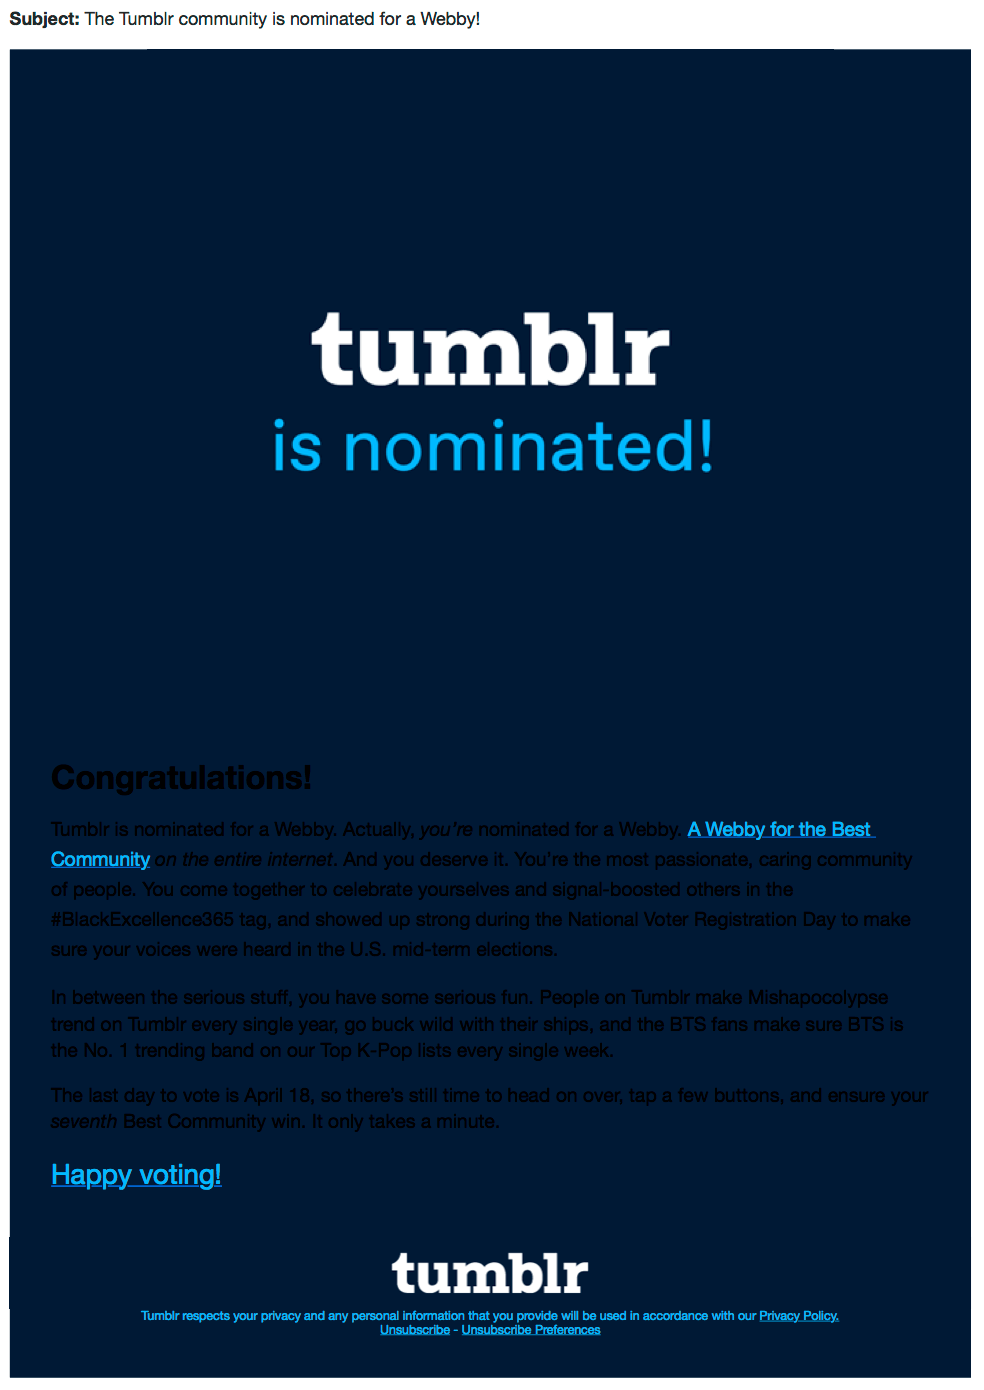 An example of low color contrast email from Tumblr black text on navy blue background